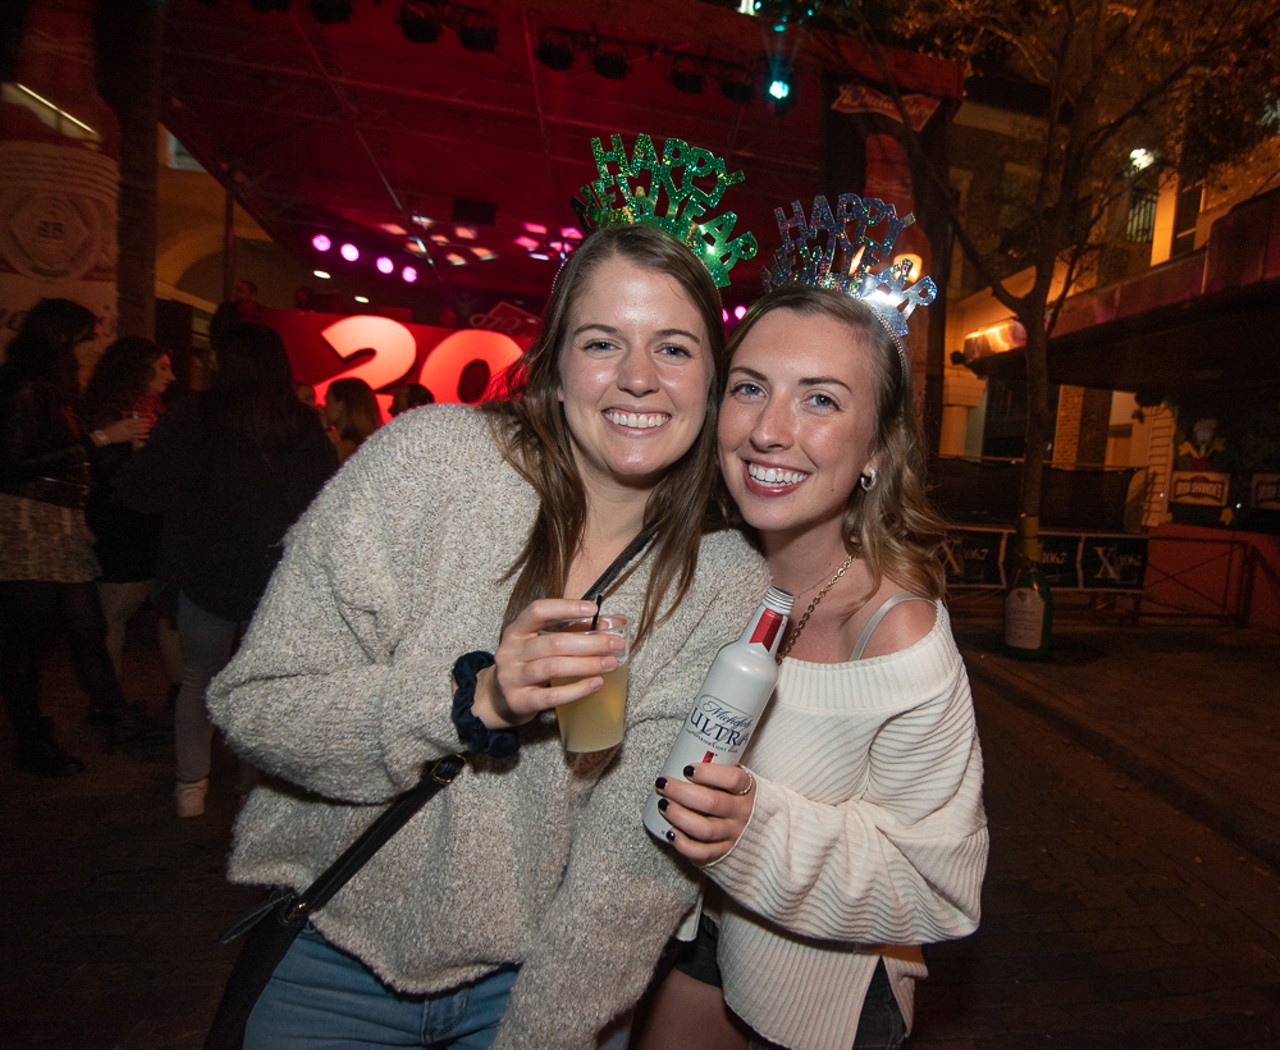 All the beautiful people we saw in downtown Orlando on New Year's Eve